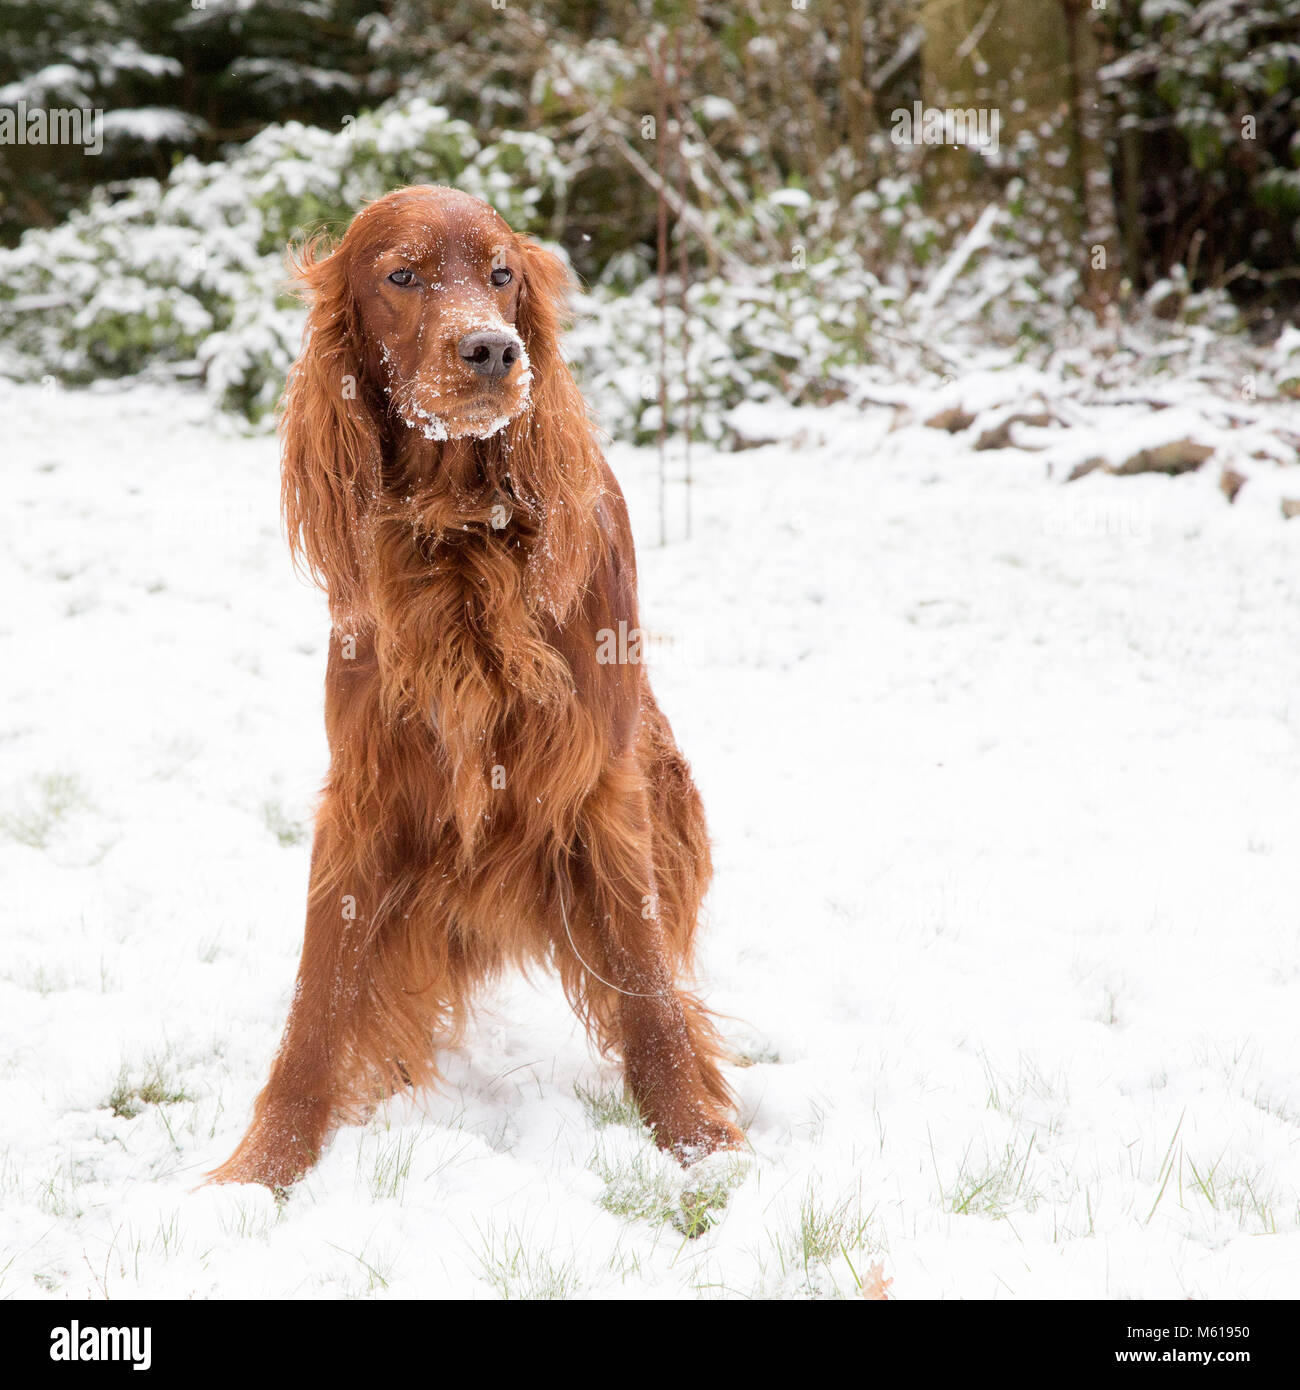 Irish Setter / Red Setter In a Snow Covered Home Garden Stock Photo